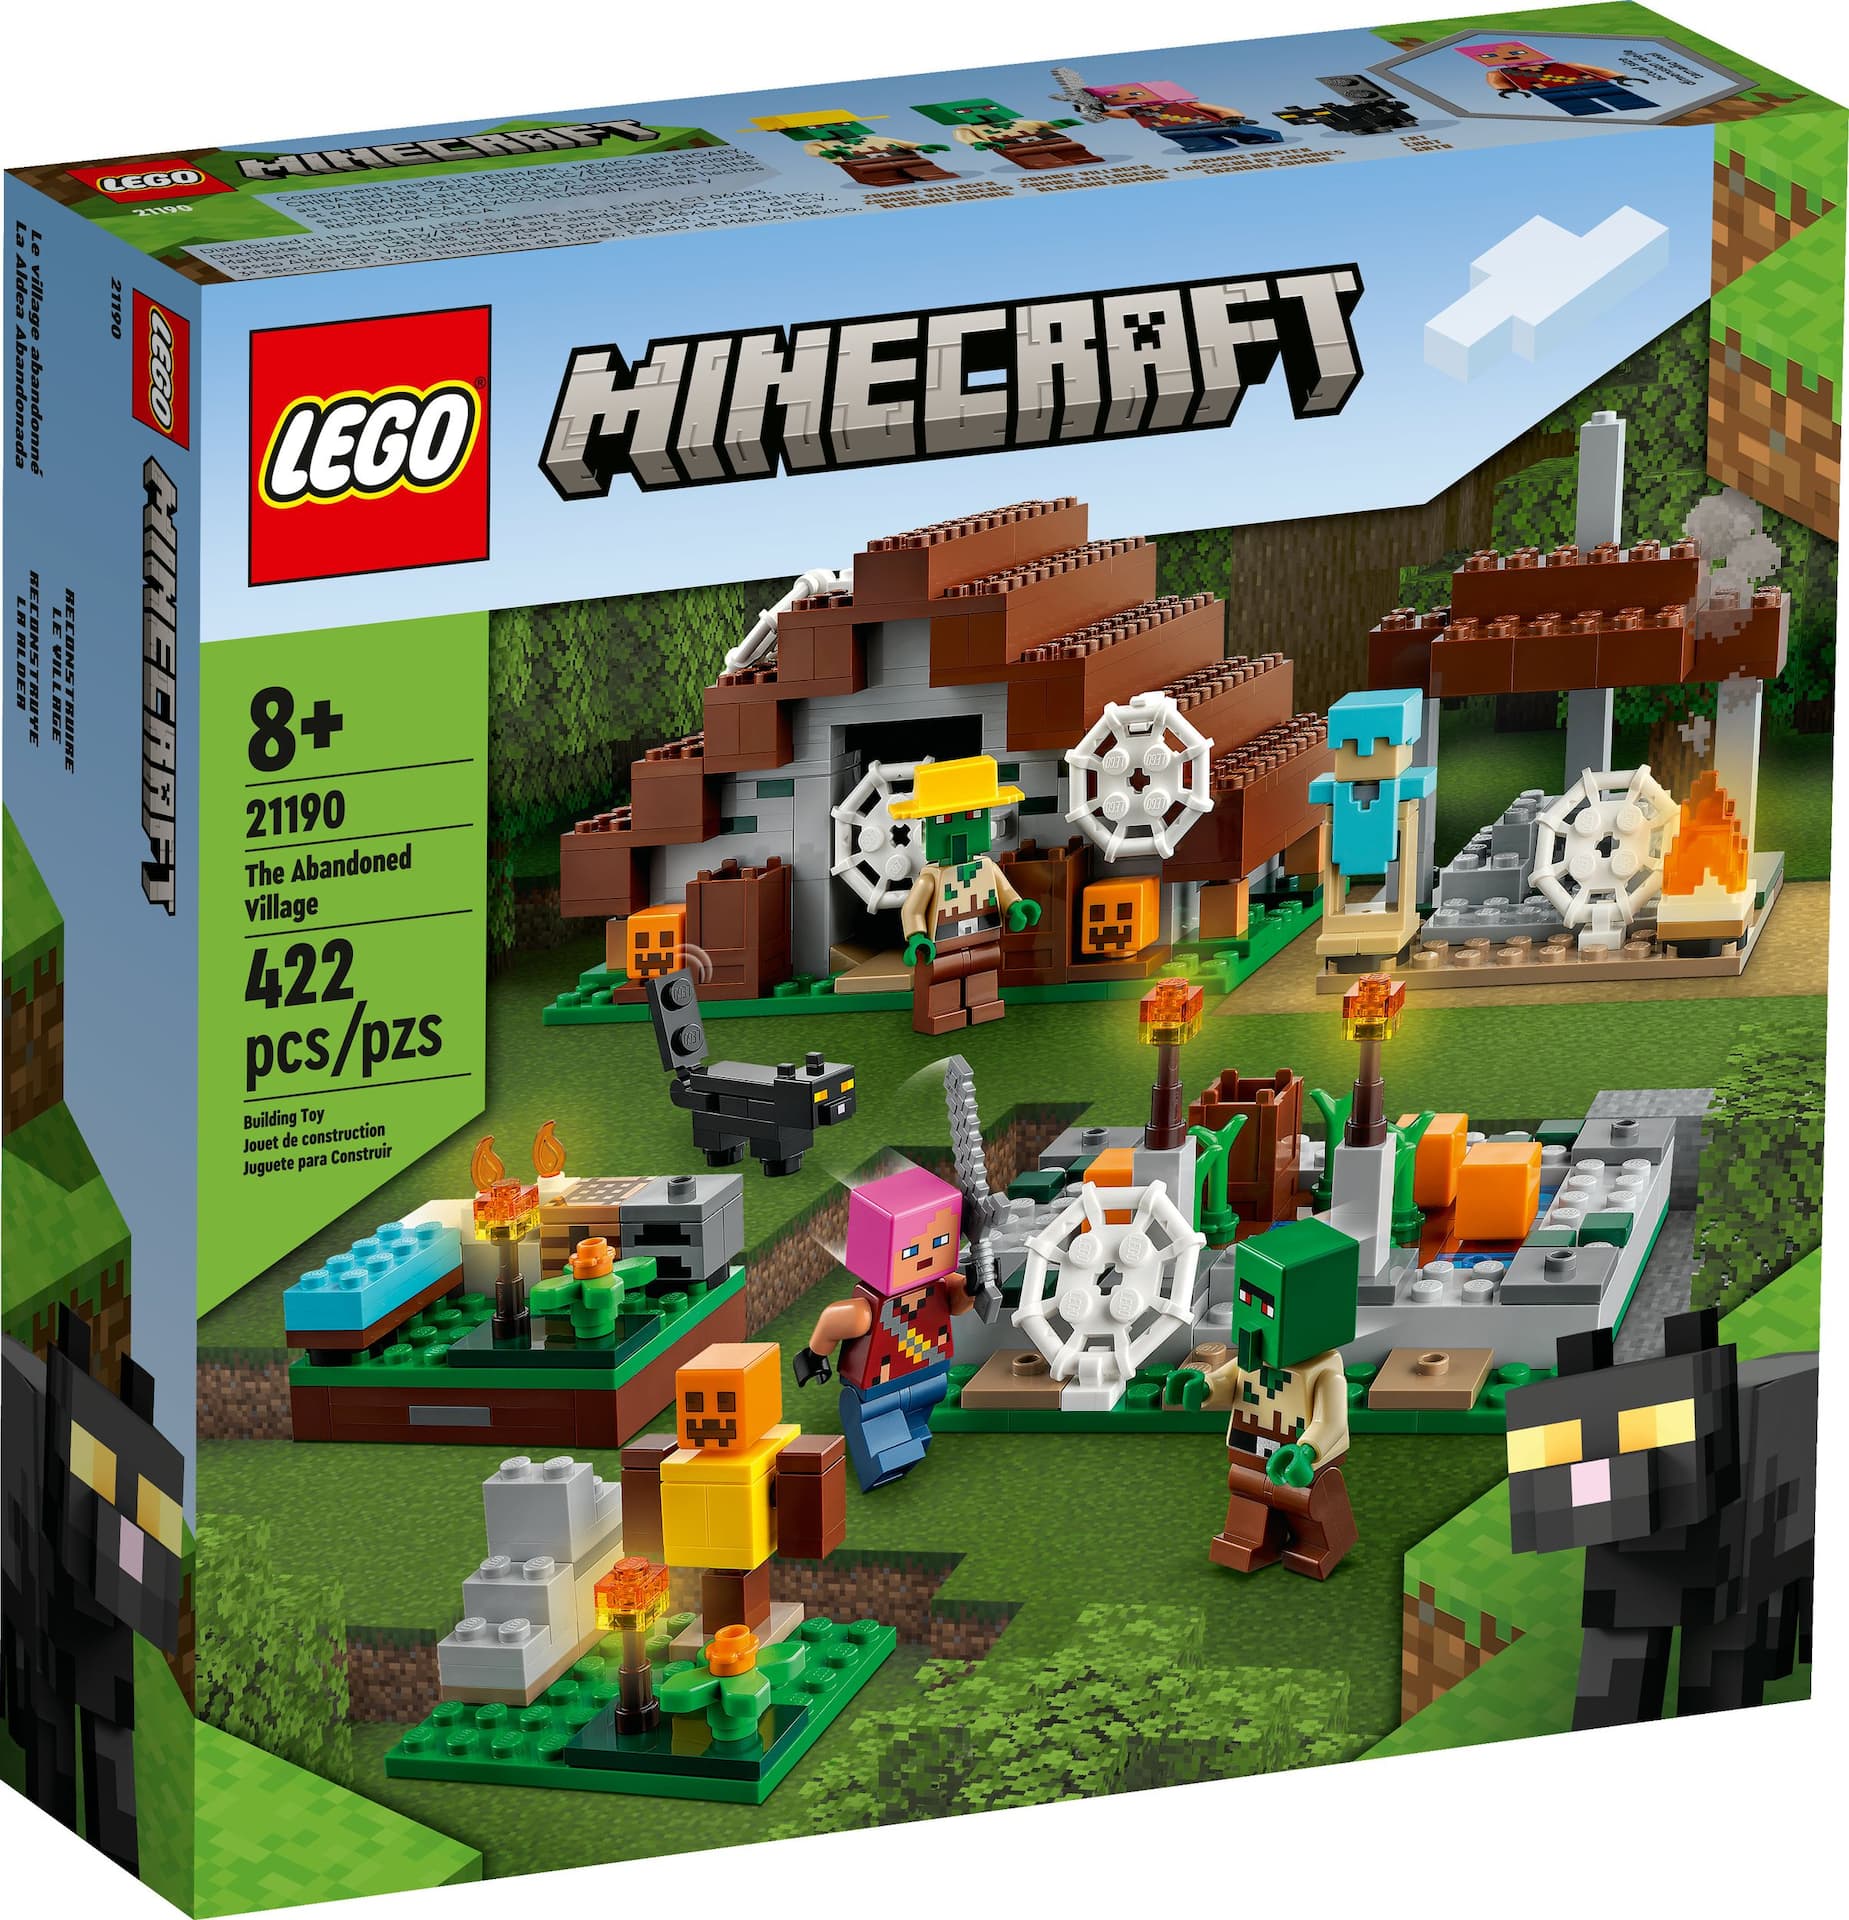 https://media-www.canadiantire.ca/product/seasonal-gardening/toys/toys-games/0509331/lego-tbd-minecraft-2-2022-e1f6d5bc-c139-441d-9be4-ca7f2a889465-jpgrendition.jpg